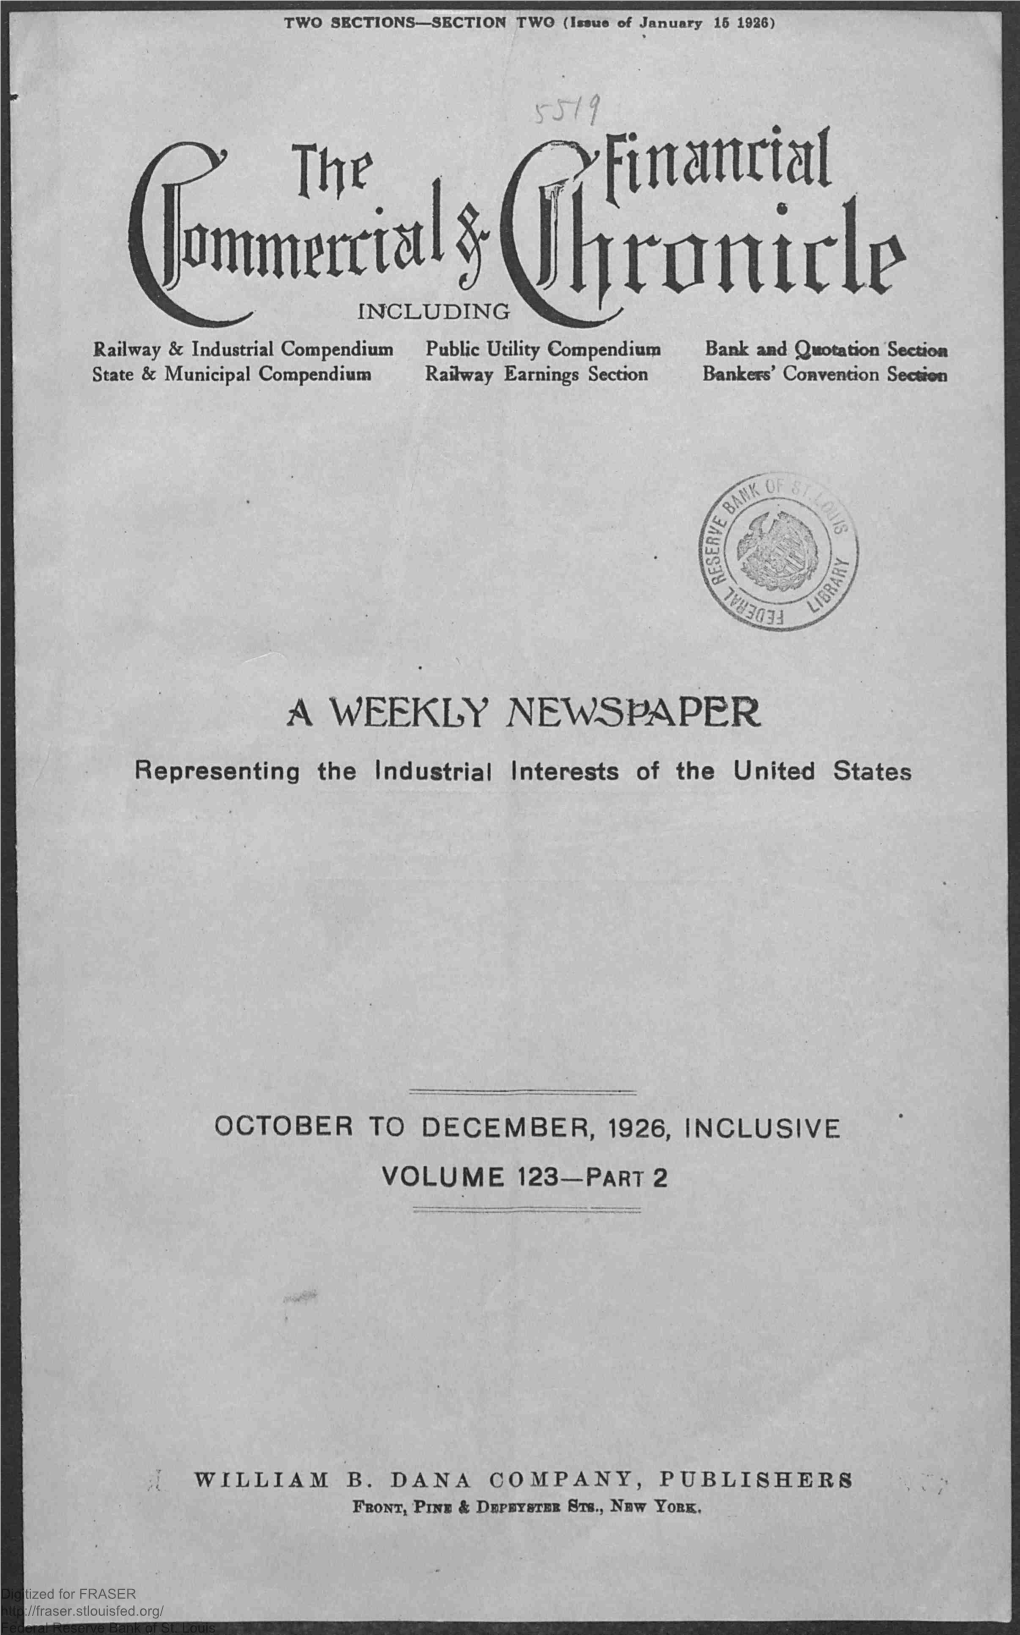 October to December 1926, Inclusive: Index To